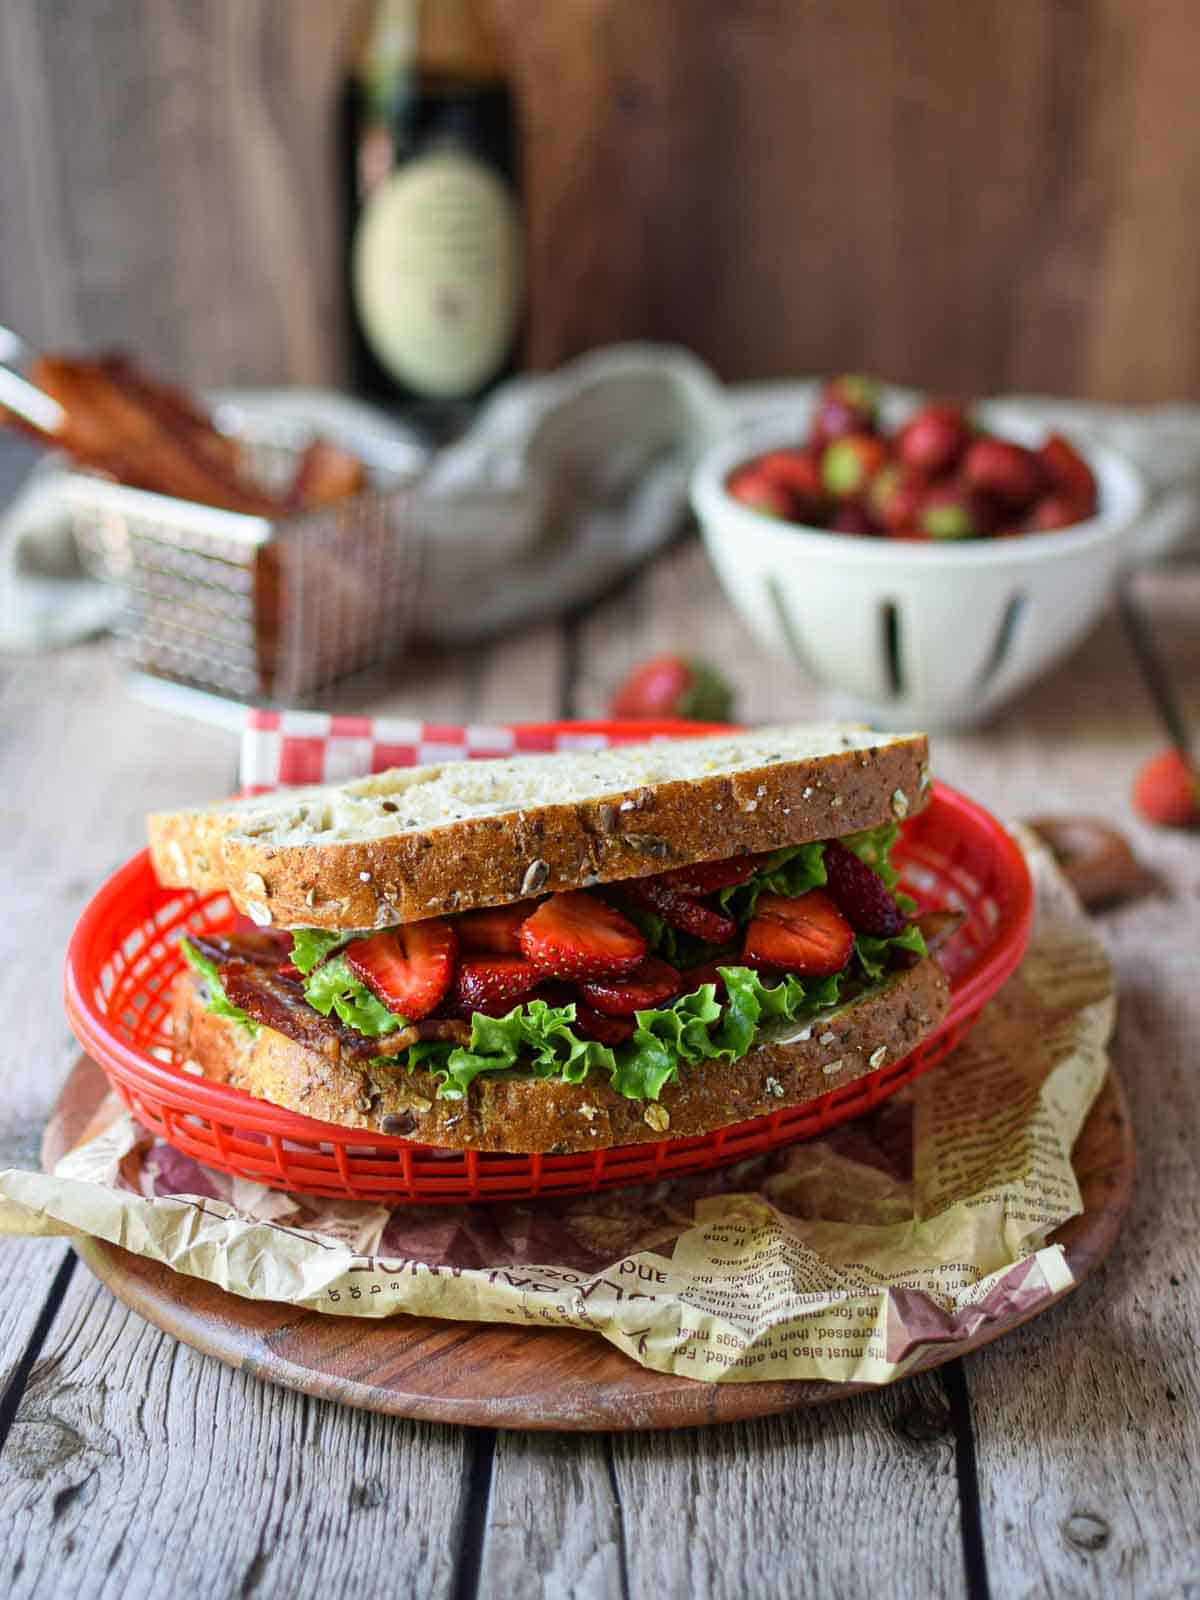 Strawberry BLT shown in a red wire basket on a wood background.